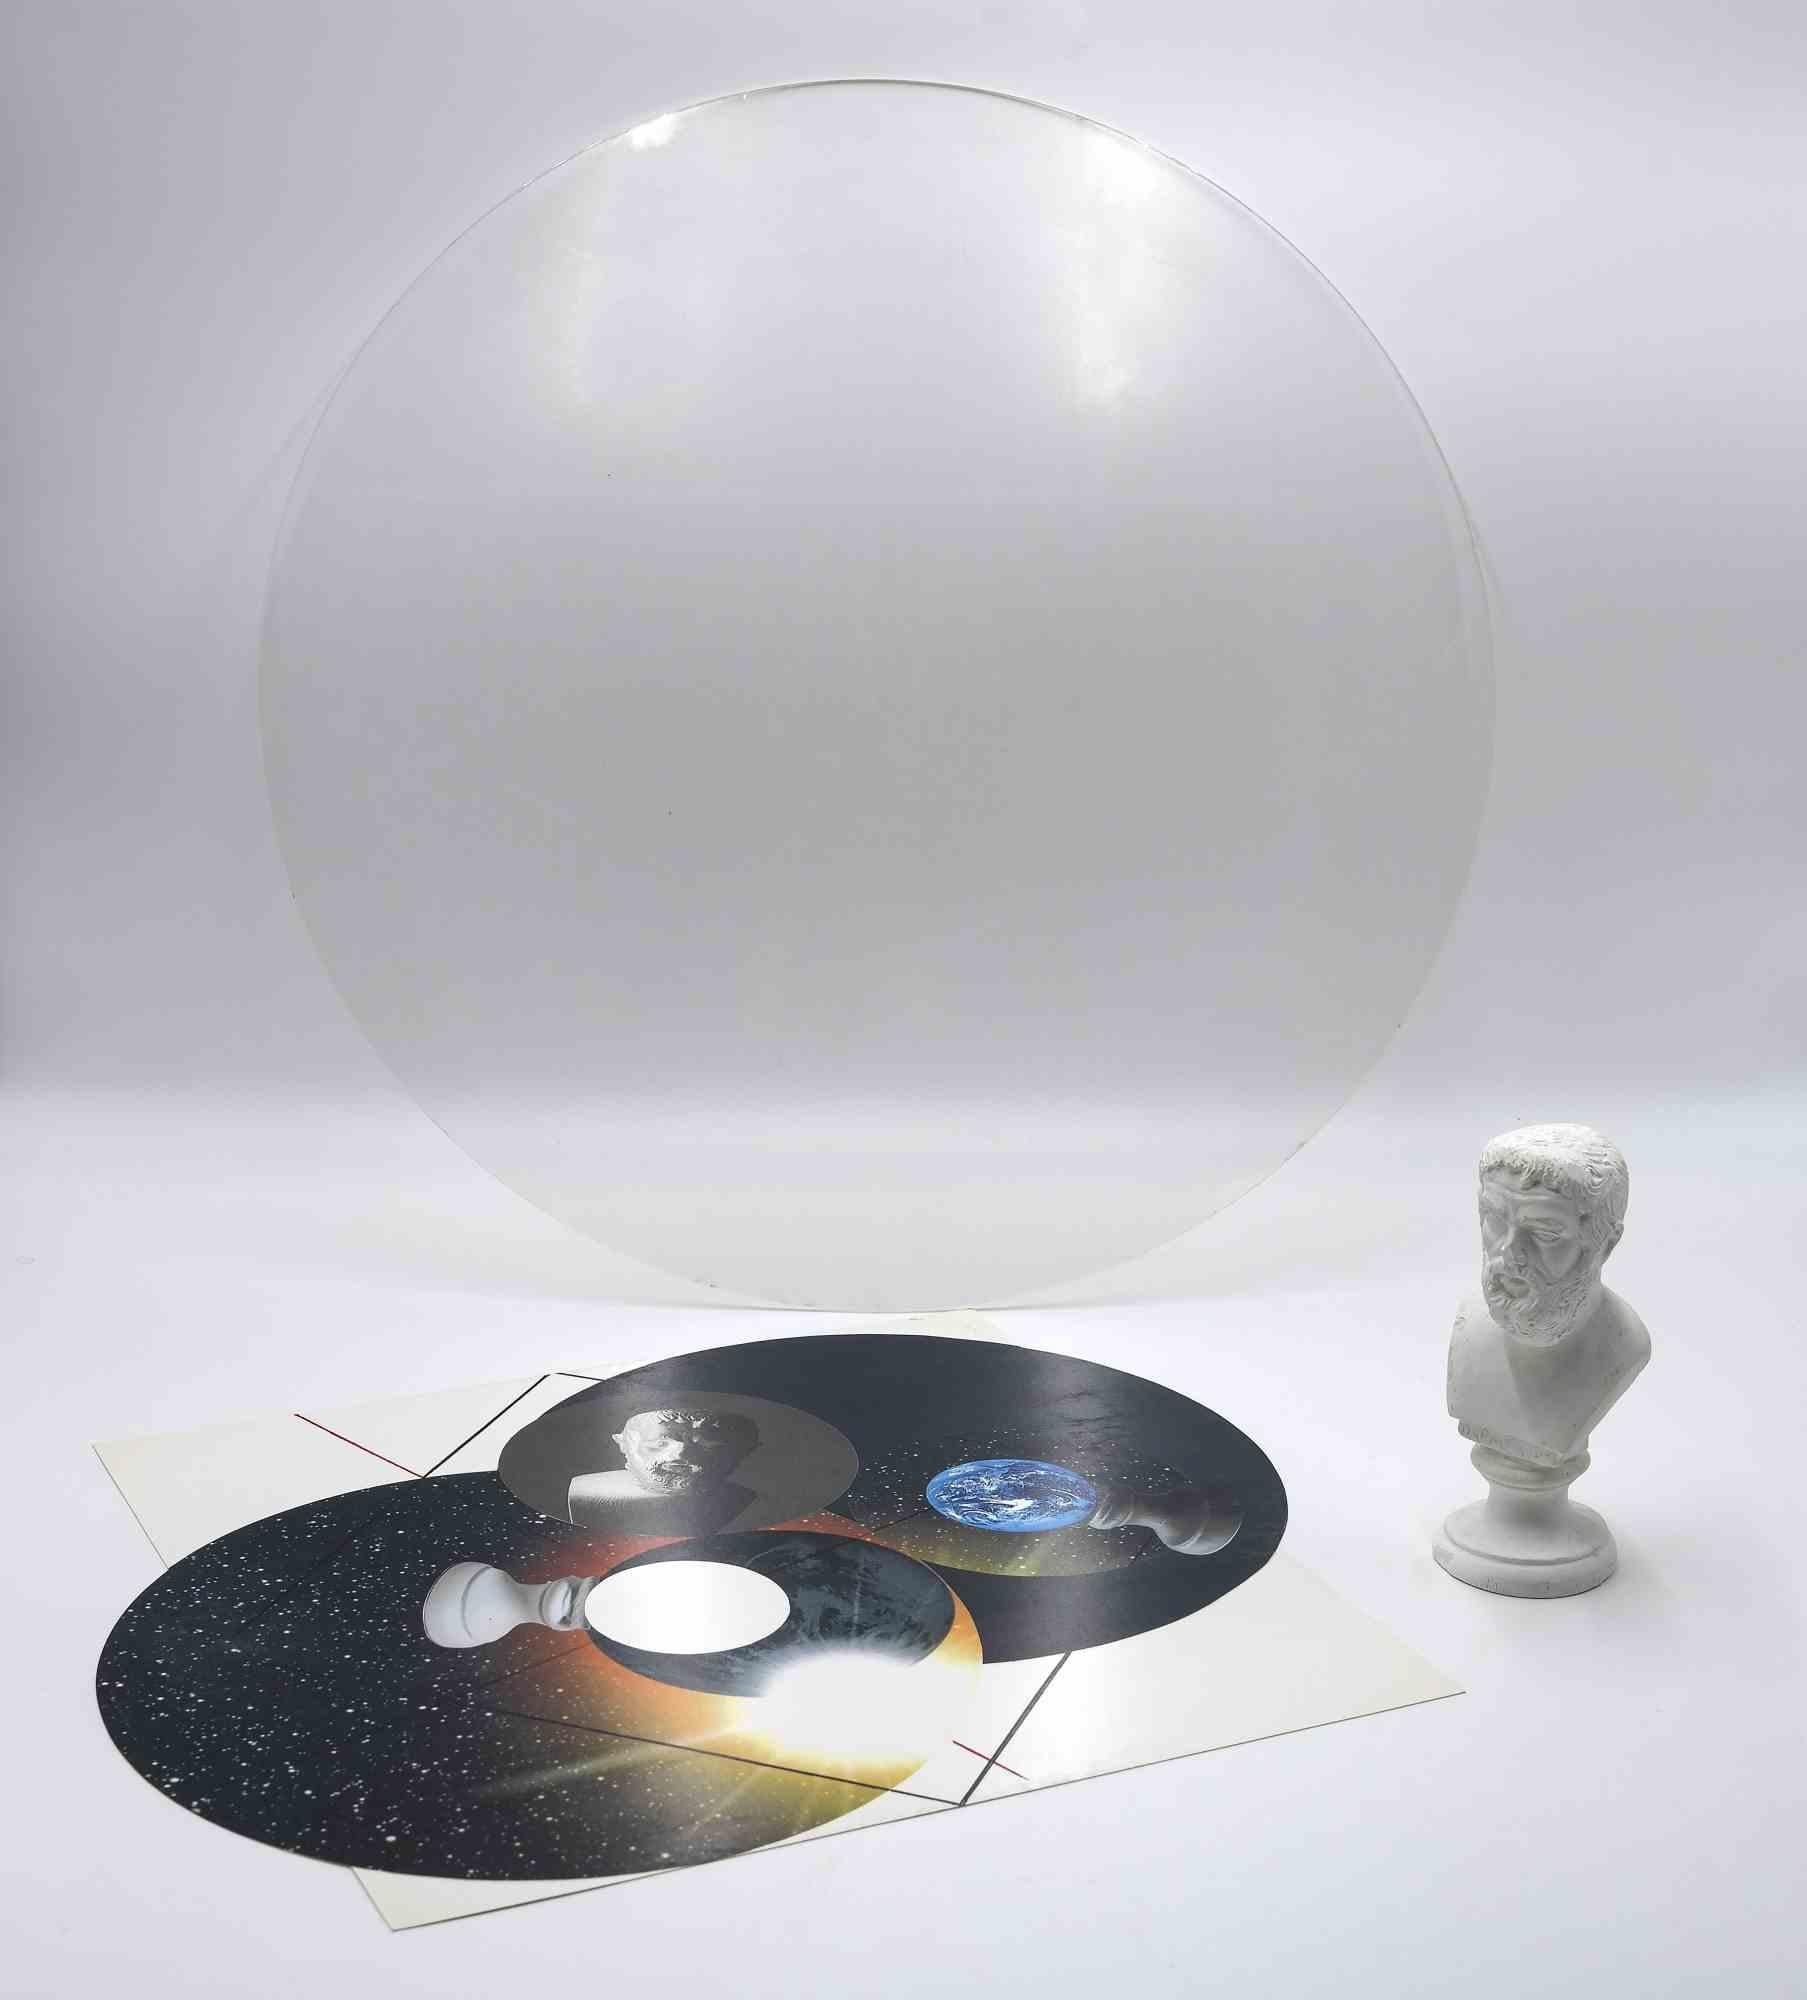 Elea is an original installation realized by the artist Giulio Paolini in 2009.

The artwork consists in a colour lithograph on cut cardboard (33 x 41 cm); a transparent plexiglas plate (diameter 47 cm) and a plaster cast (h. 14.5 cm) depicting the